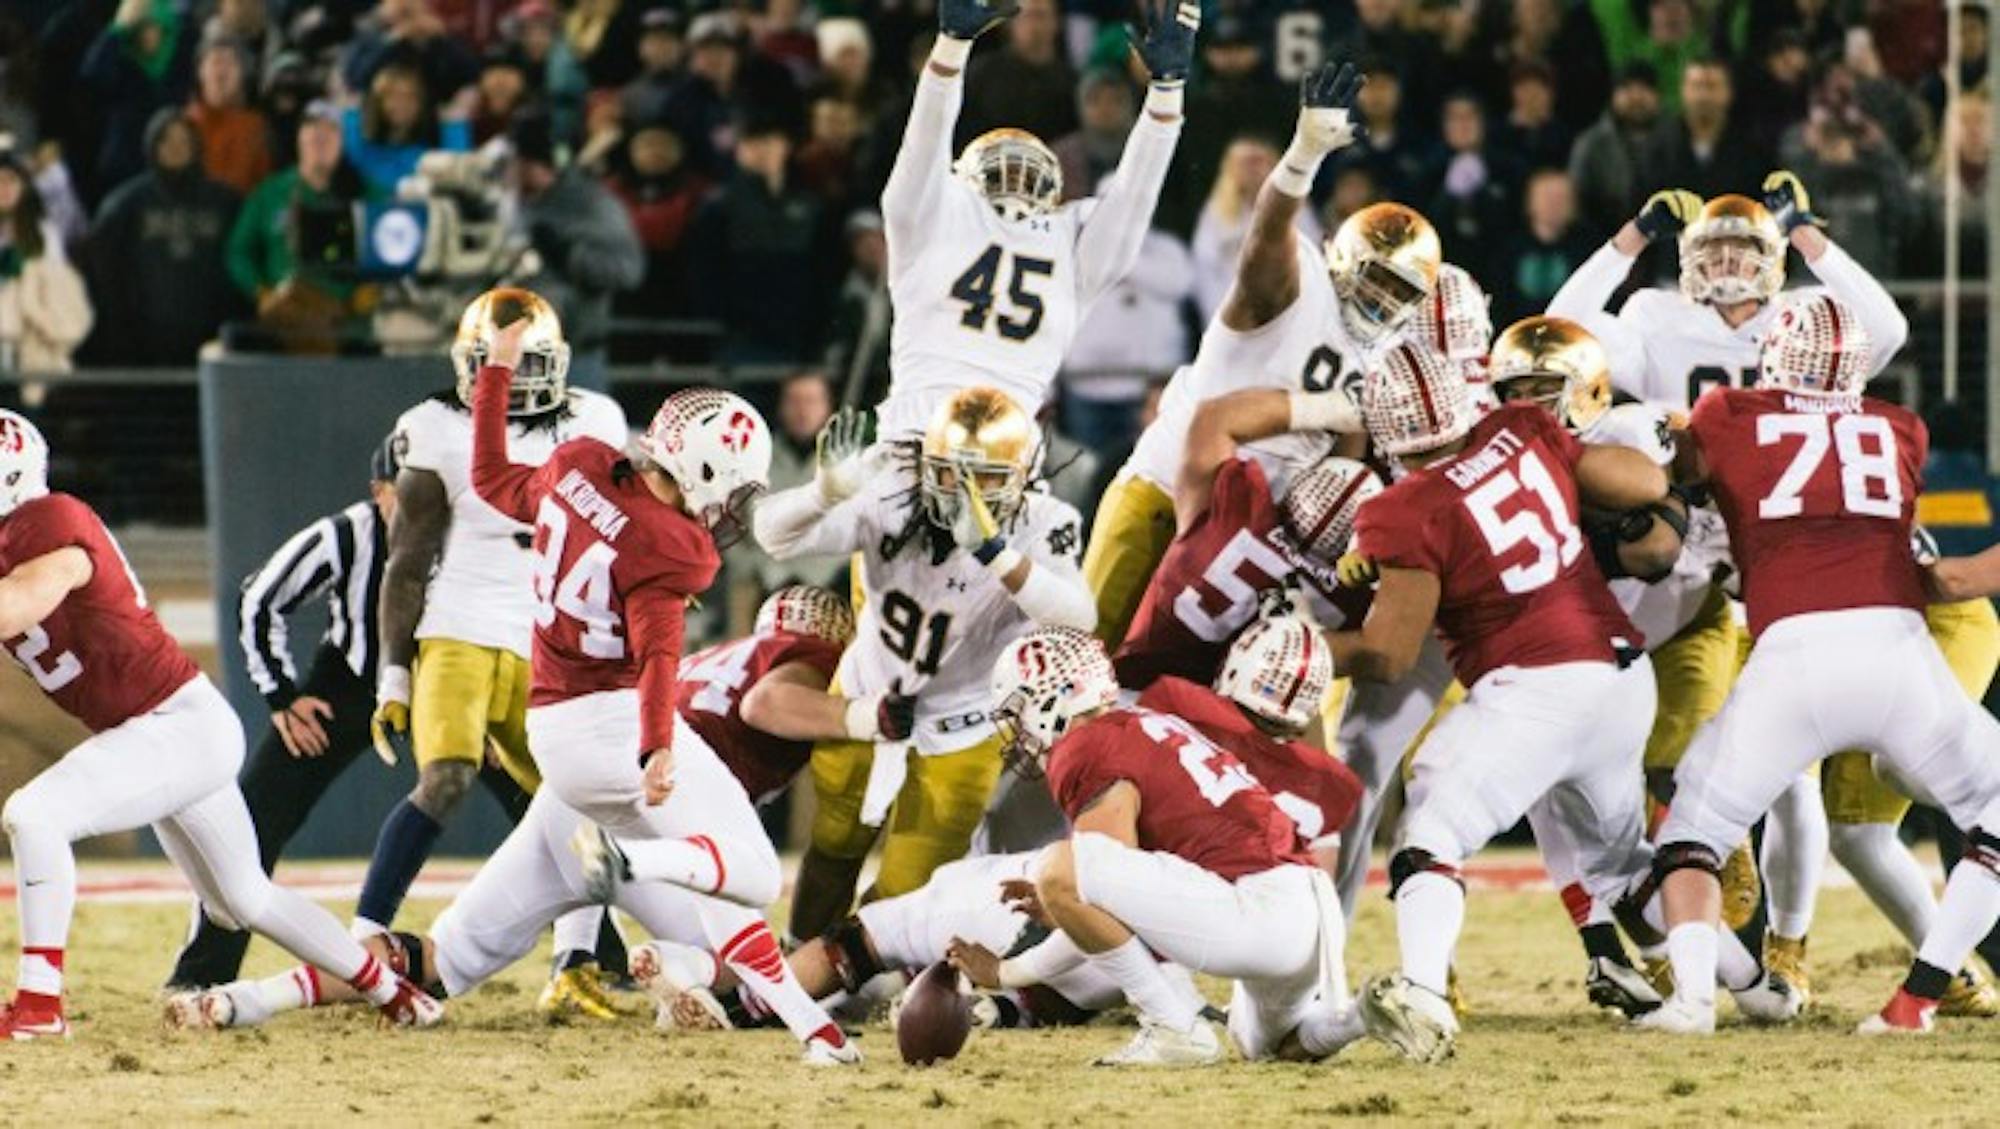 Cardinal senior kicker Conrad Ukropina kicks the game-winning 45-yard field goal to lift Stanford over Notre Dame, 38-36, at Stanford Stadium on Saturday. Irish sophomore quarterback DeShone Kizer led an 88-yard touchdown drive to put the Irish ahead with 30 seconds left before Ukropina’s right leg kicked Notre Dame out of playoff contention.